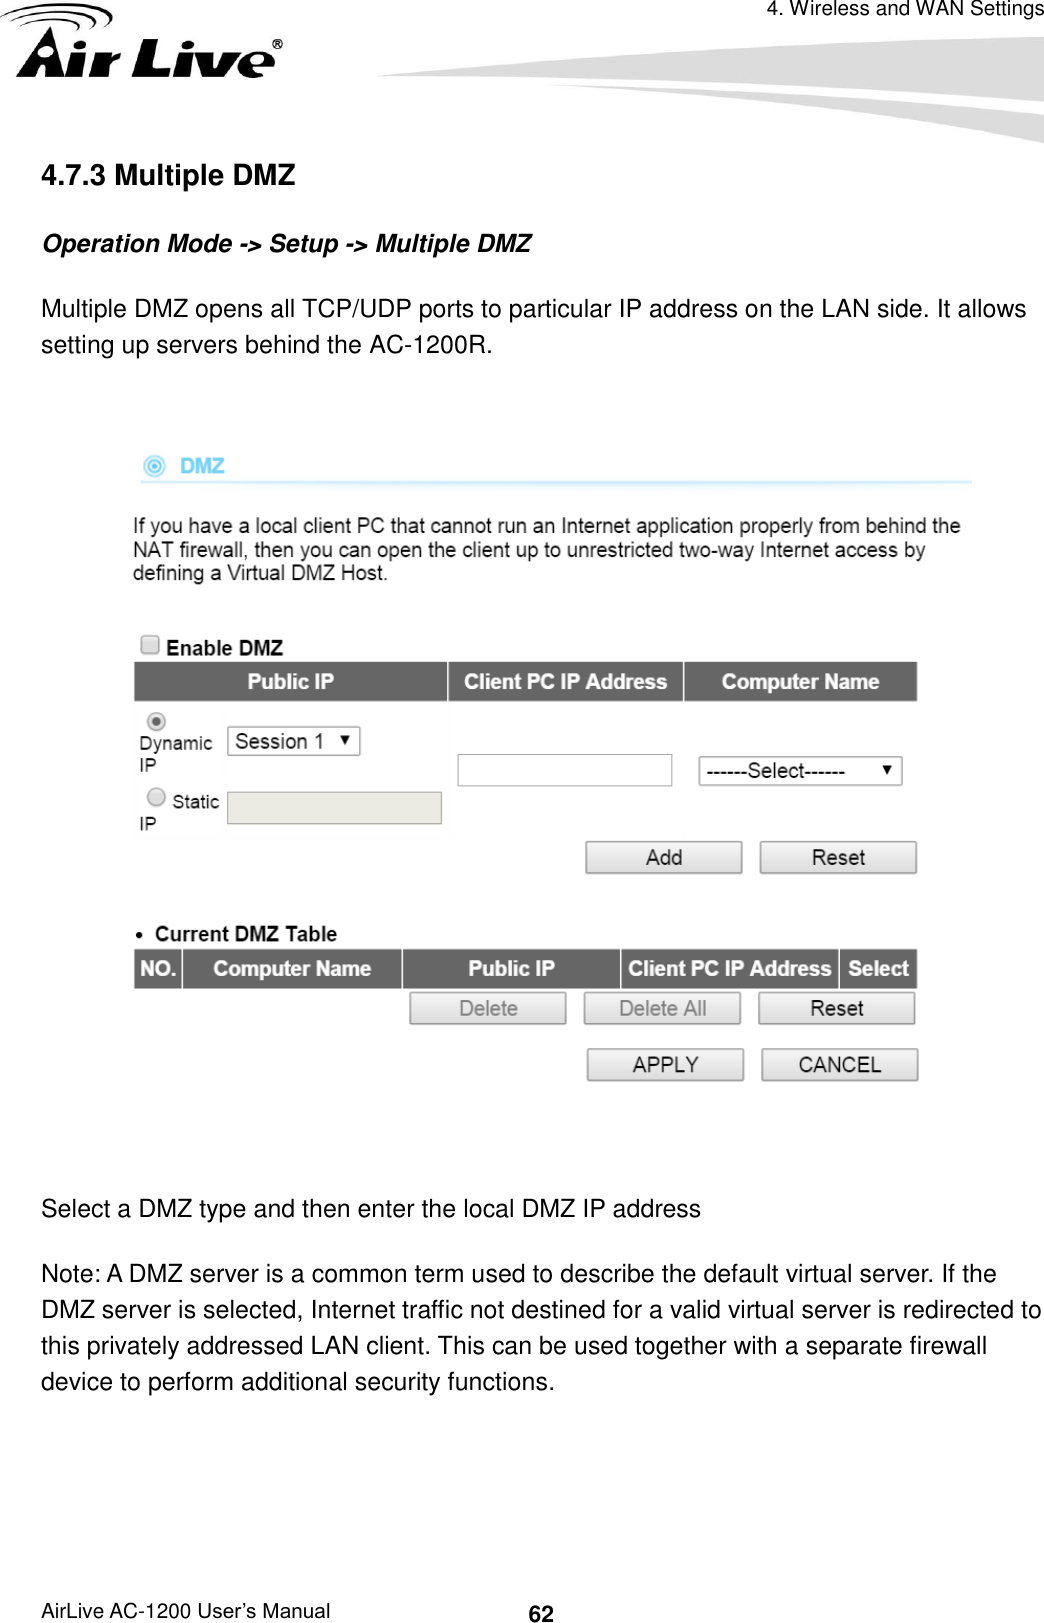 4. Wireless and WAN Settings AirLive AC-1200 User’s Manual 62 4.7.3 Multiple DMZ Operation Mode -&gt; Setup -&gt; Multiple DMZ Multiple DMZ opens all TCP/UDP ports to particular IP address on the LAN side. It allows setting up servers behind the AC-1200R.    Select a DMZ type and then enter the local DMZ IP address Note: A DMZ server is a common term used to describe the default virtual server. If the DMZ server is selected, Internet traffic not destined for a valid virtual server is redirected to this privately addressed LAN client. This can be used together with a separate firewall device to perform additional security functions.  